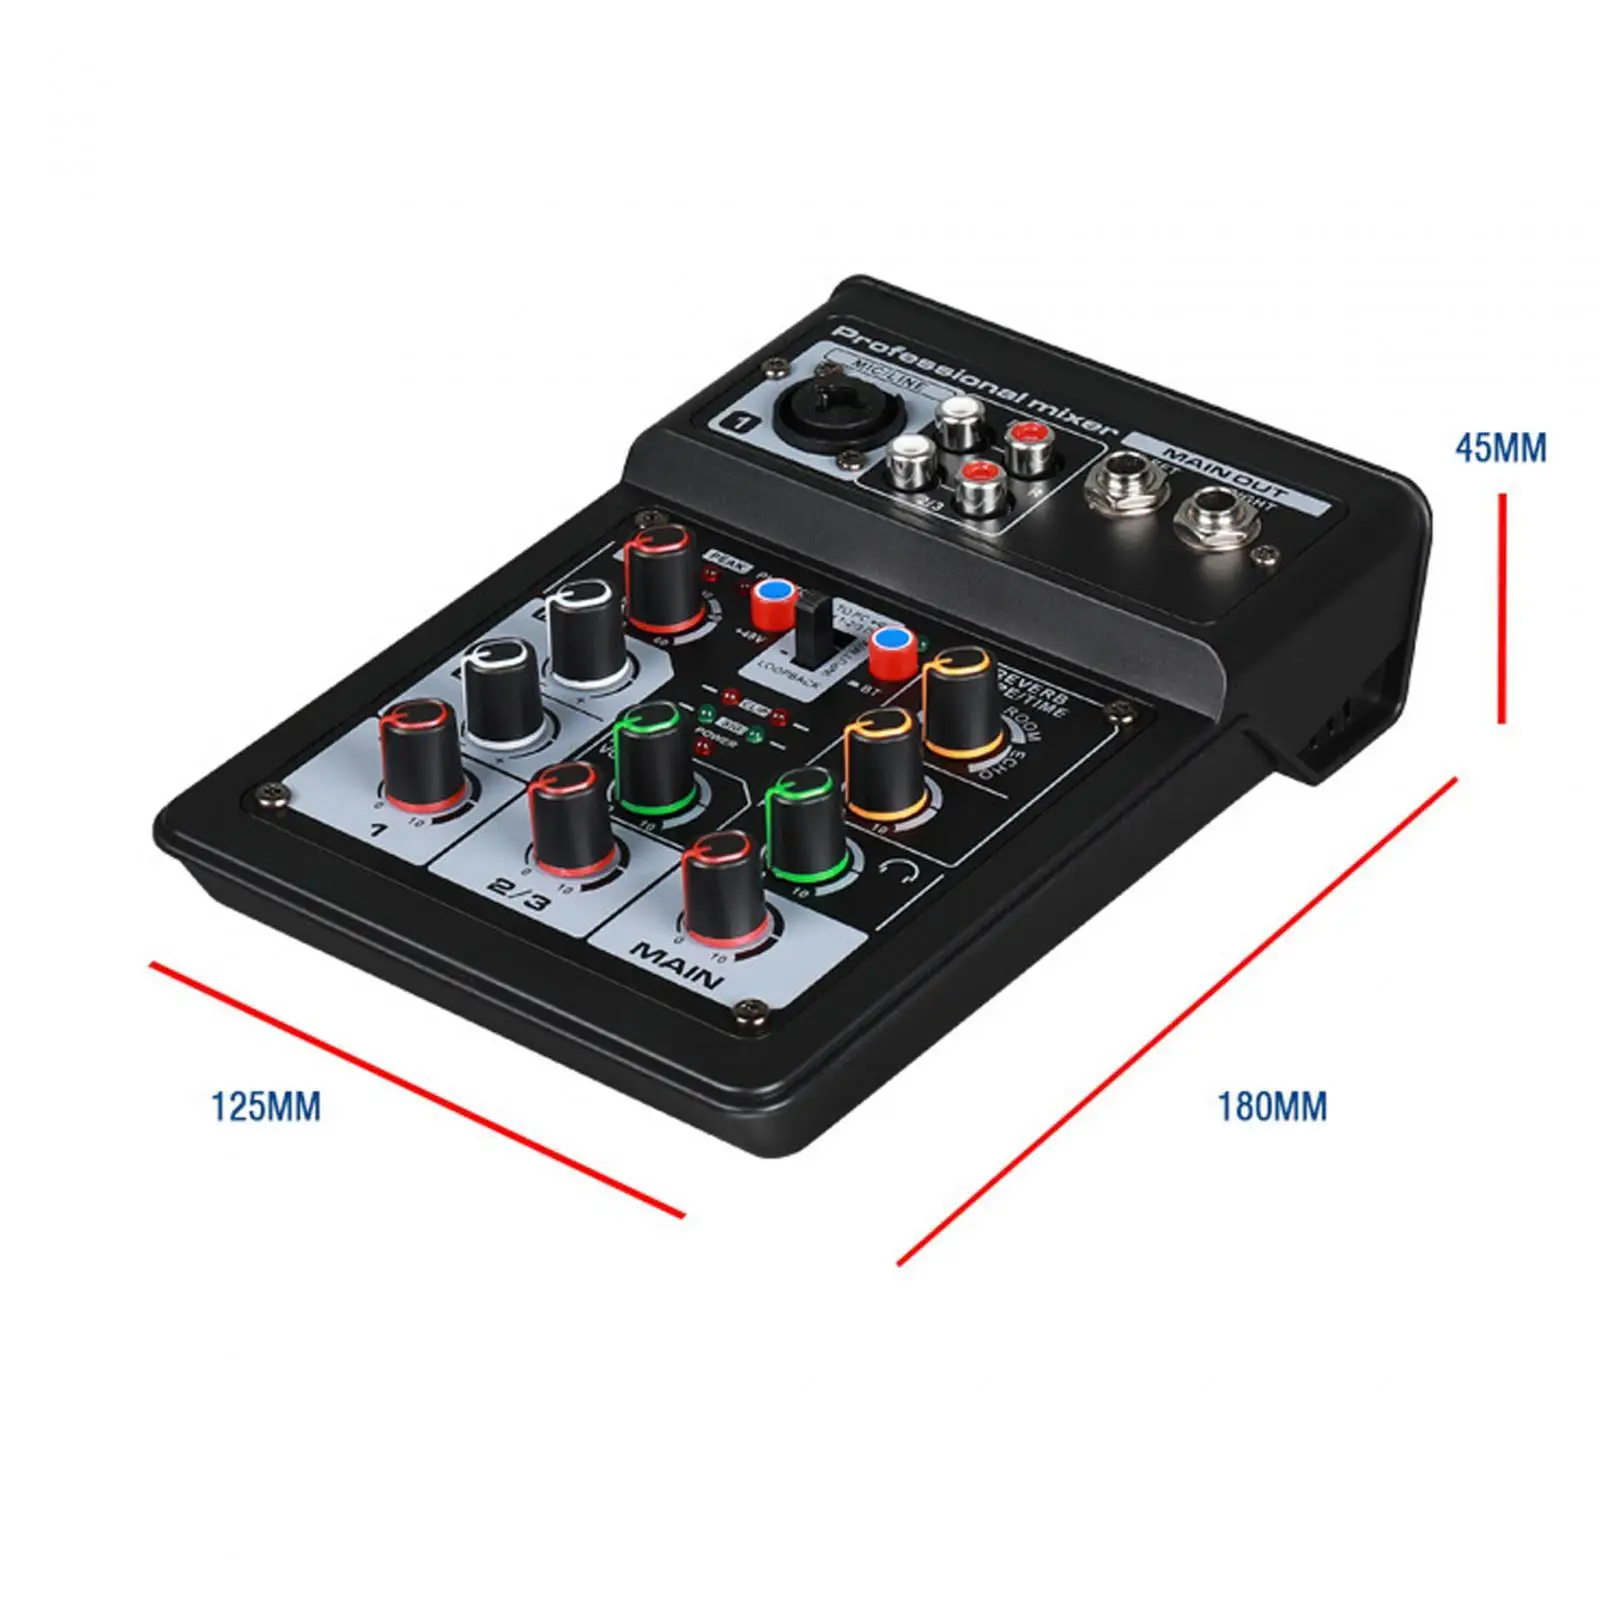 Audio Mixer Reverb DJ Controller with Effects 48V Power Digital Stereo Mixer for PC Sound Card KTV Live Streaming Home